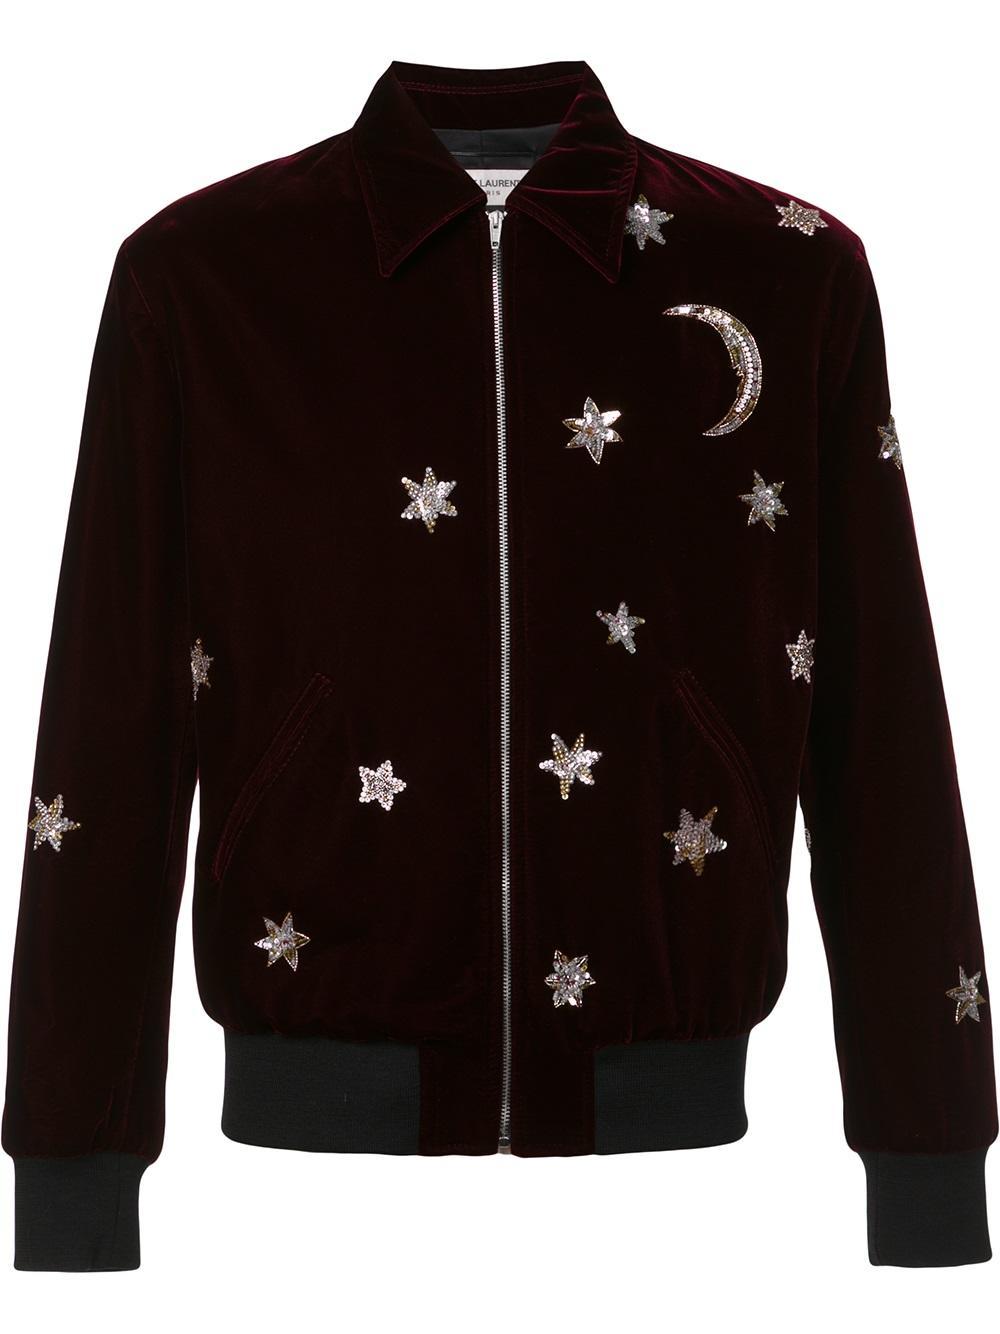 Saint Laurent Star And Moon Embellished Bomber Jacket in Red for Men - Lyst